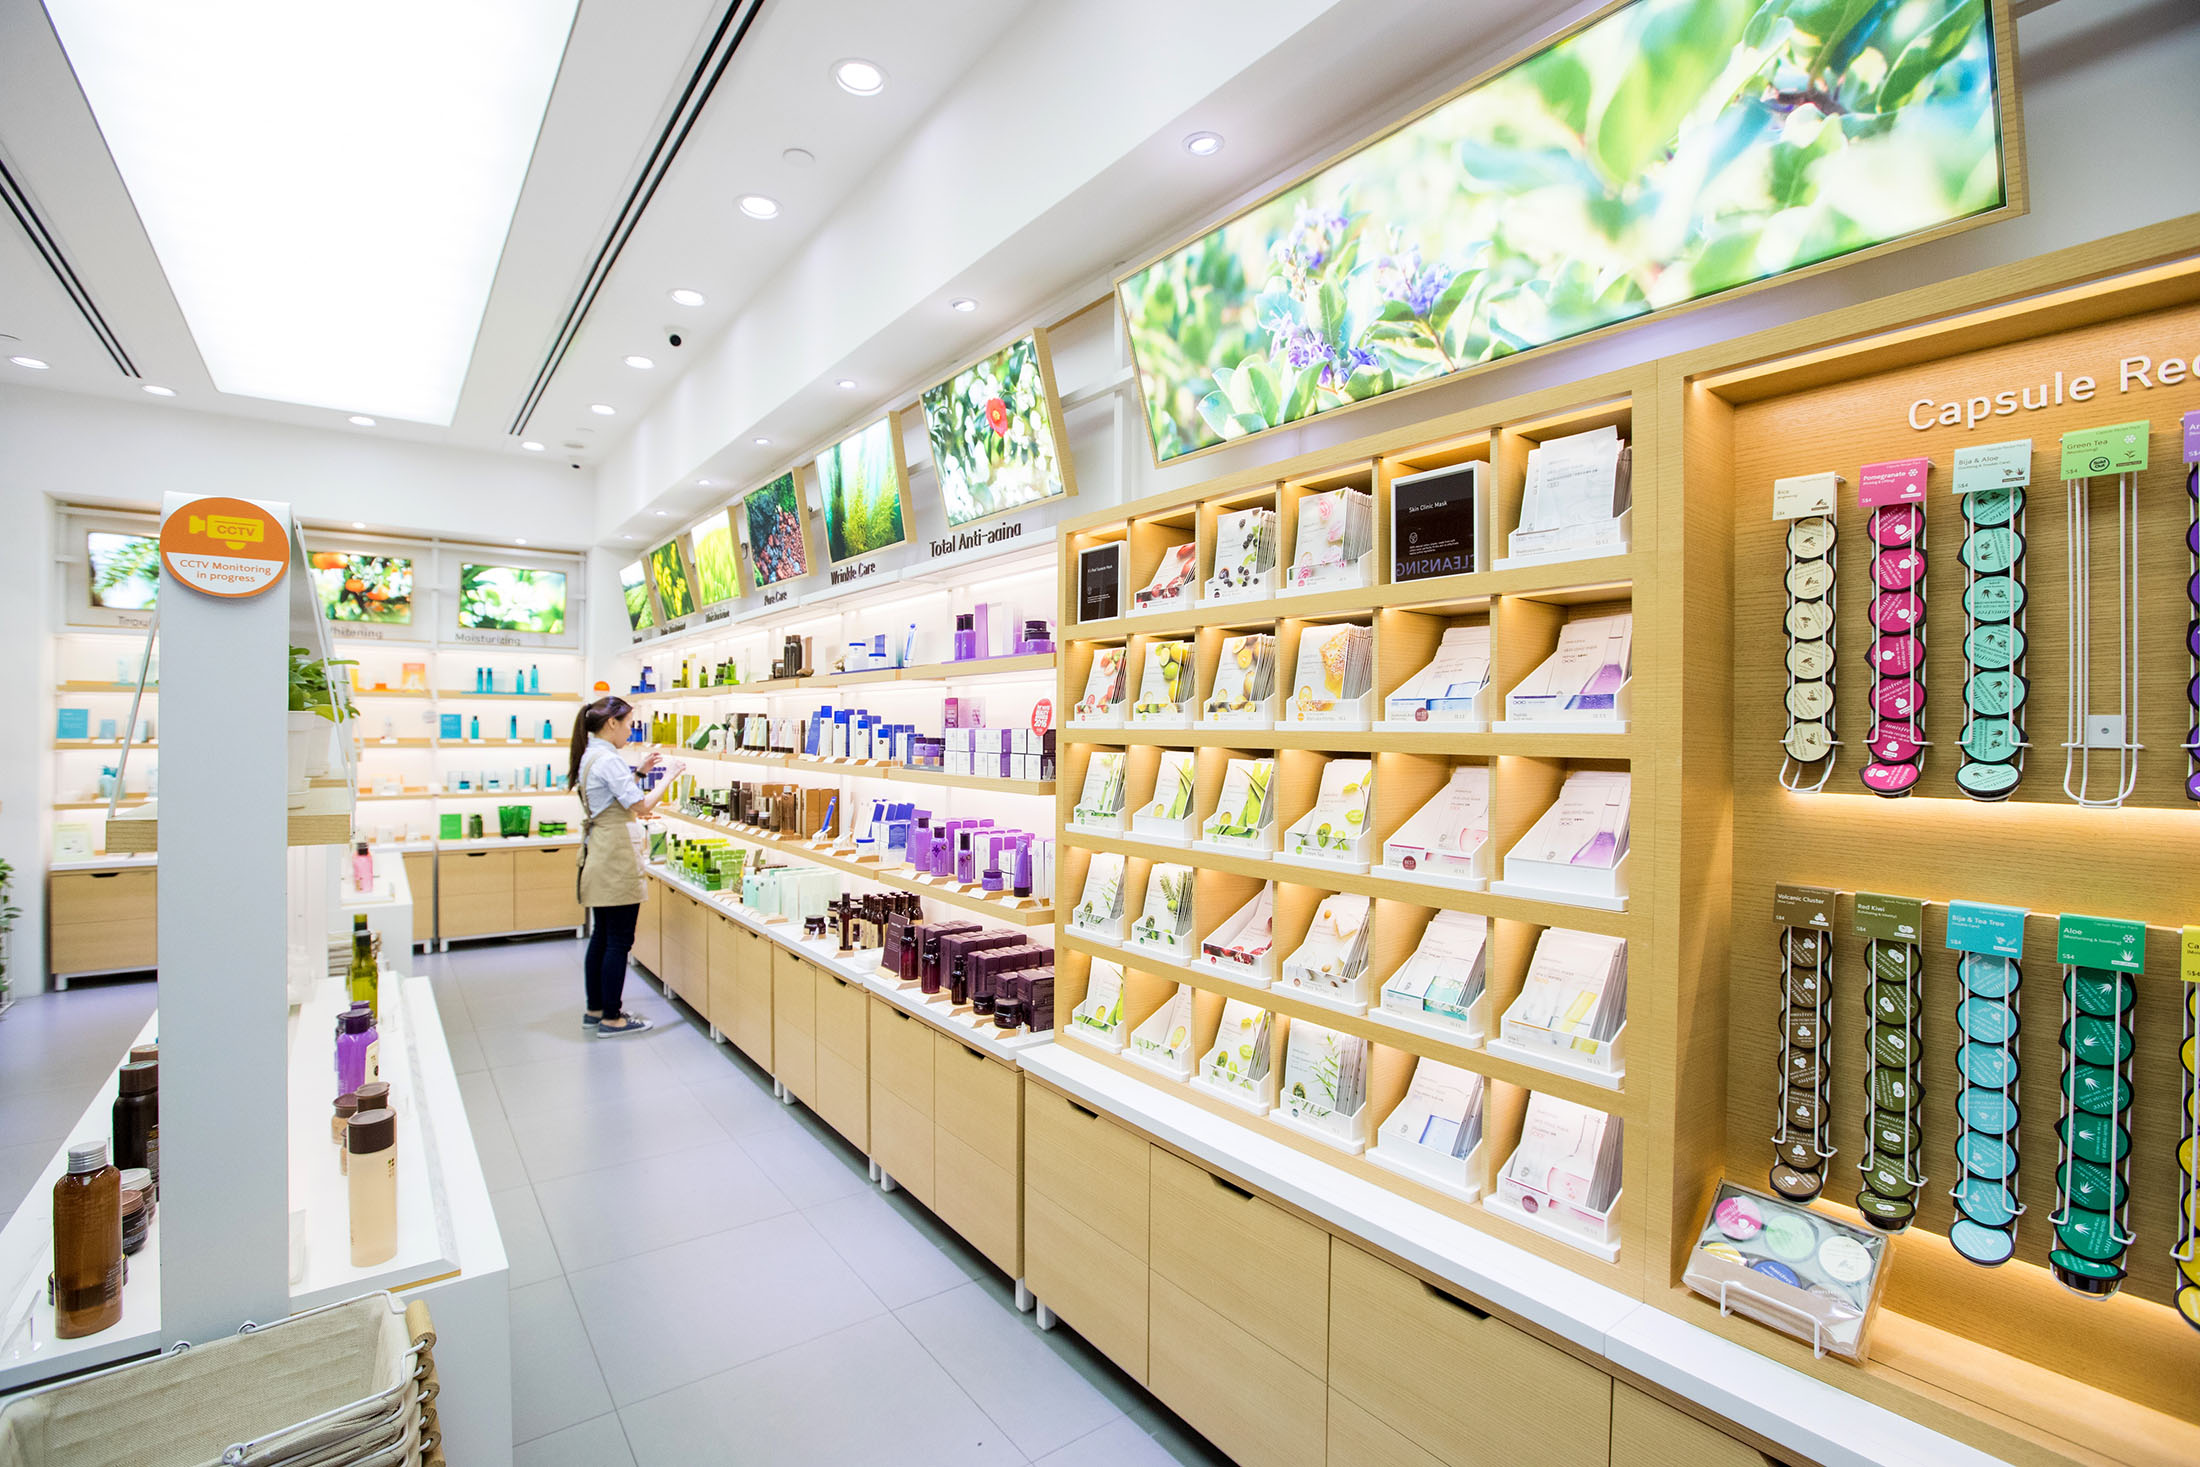 A employee organizes products in the store of Innisfree, an Amorepacific Corp. cosmetic brand, at the Ngee Ann City shopping and commercial center in Singapore, on Tuesday, Sept. 12, 2017.
